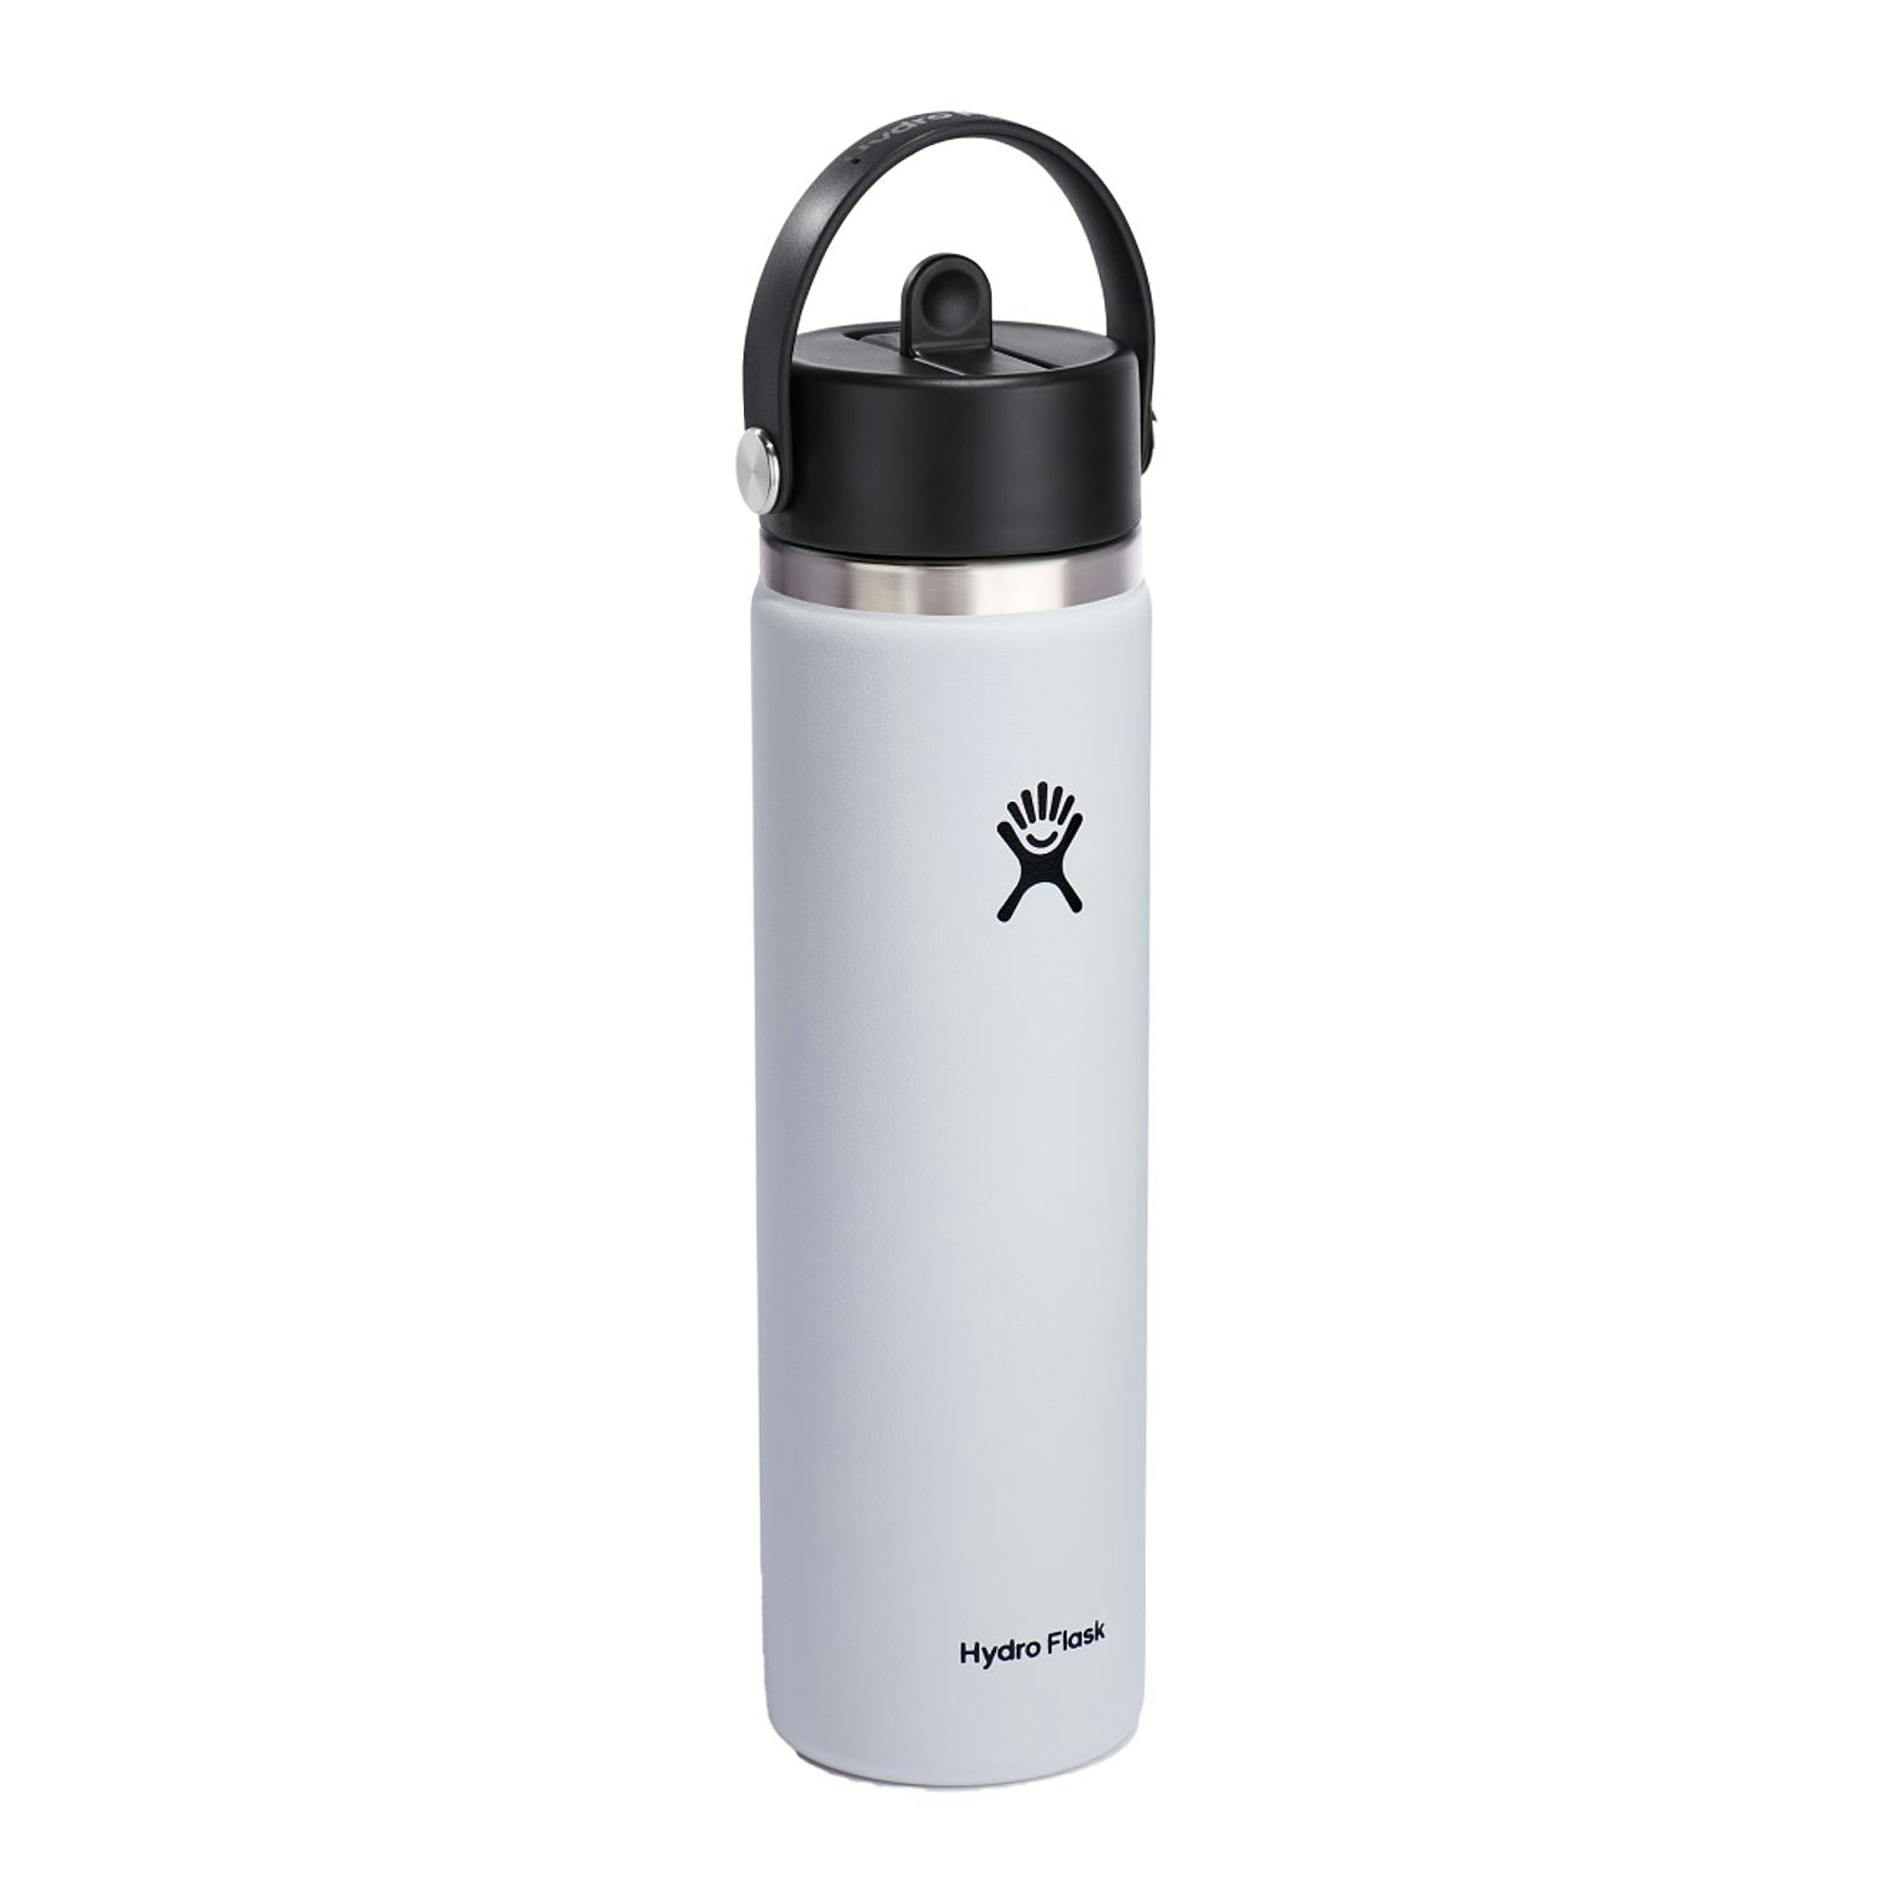 Hydro Flask Wide Mouth 24oz Bottle with Flex Straw Cap - additional Image 2